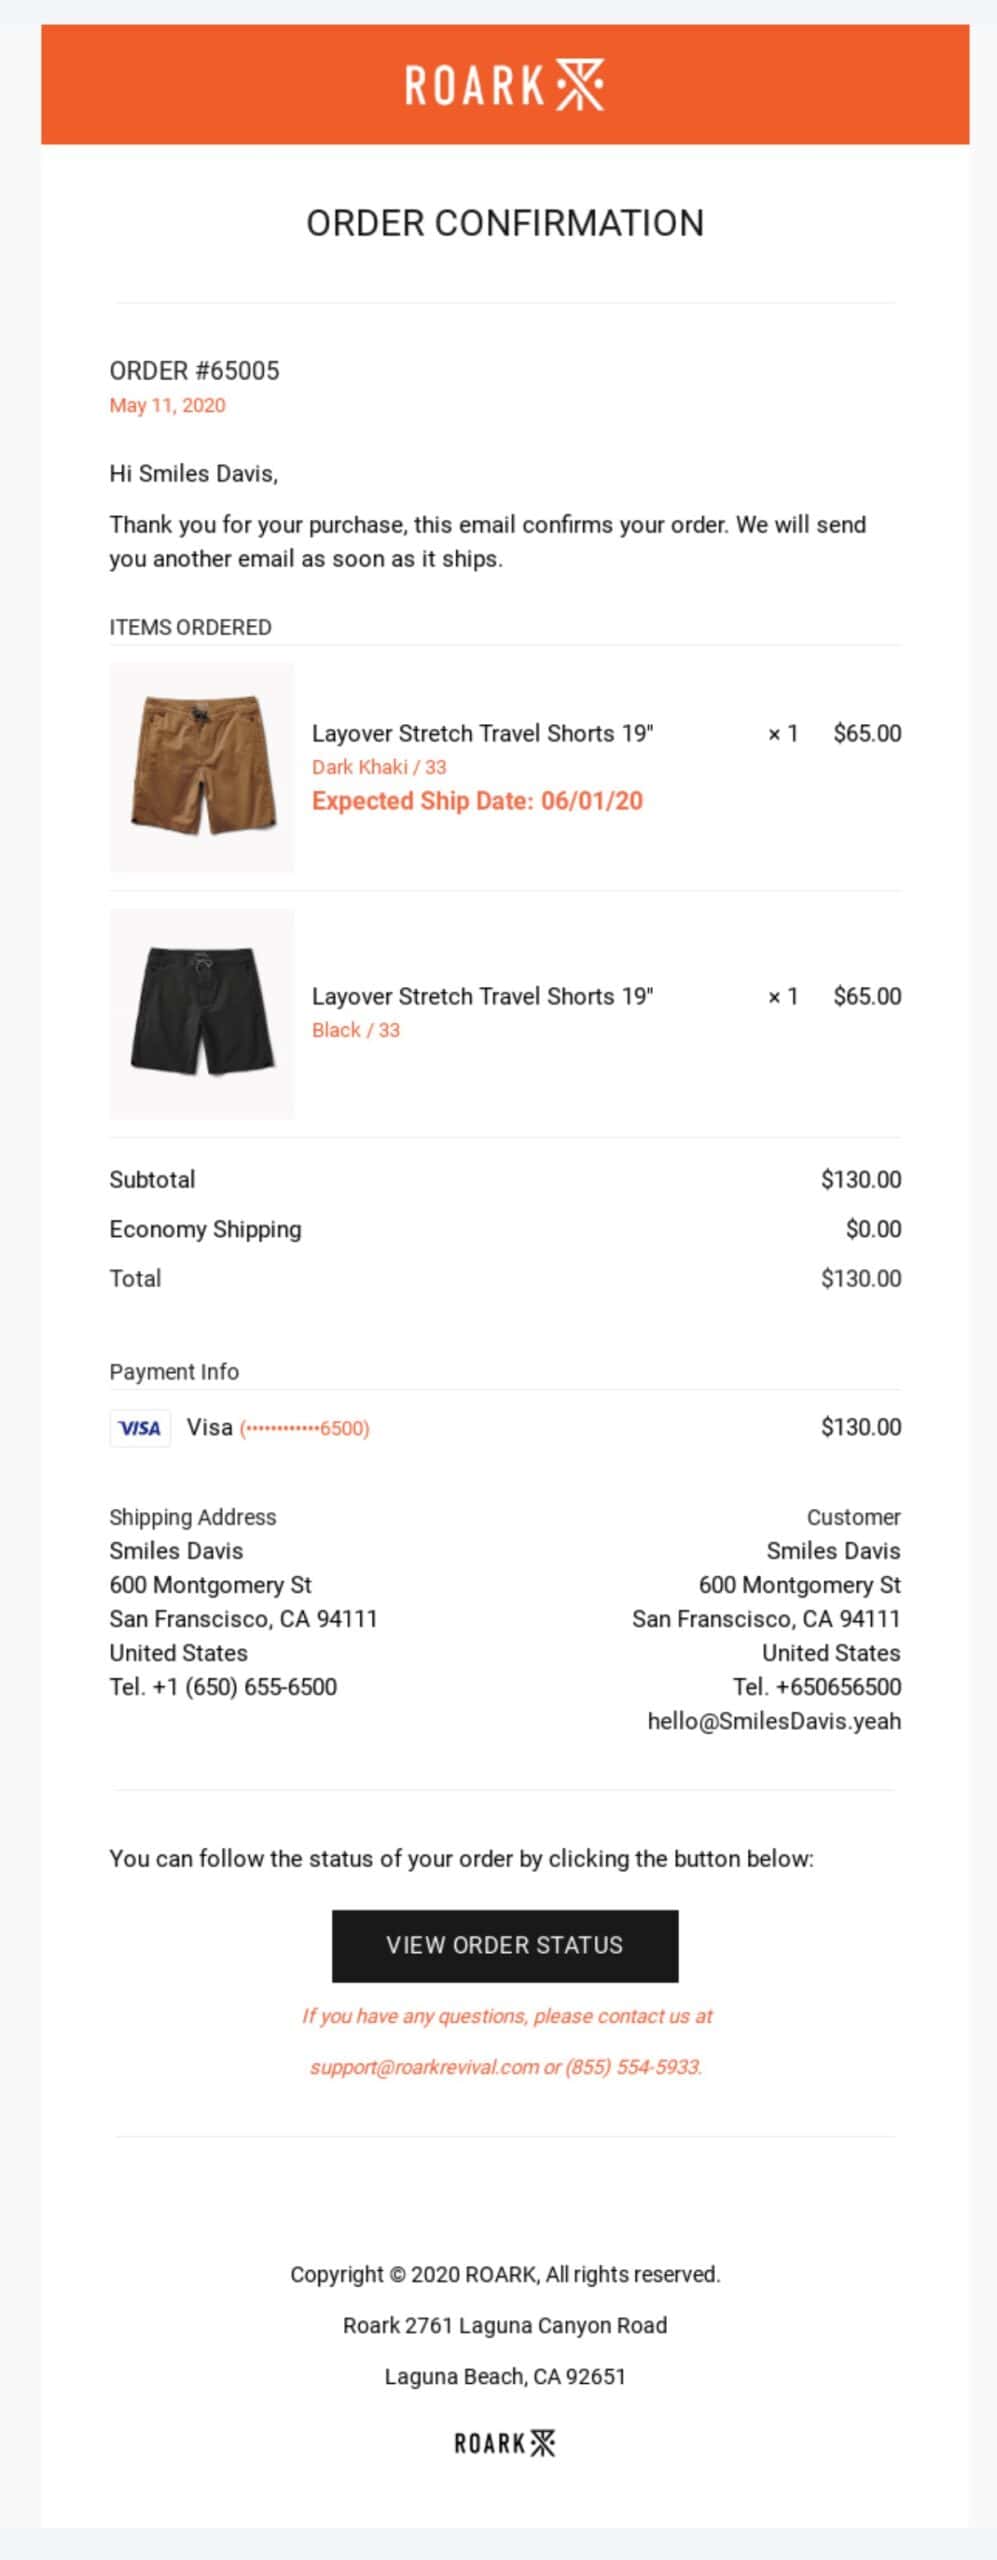 Order confirmation email example by Roark